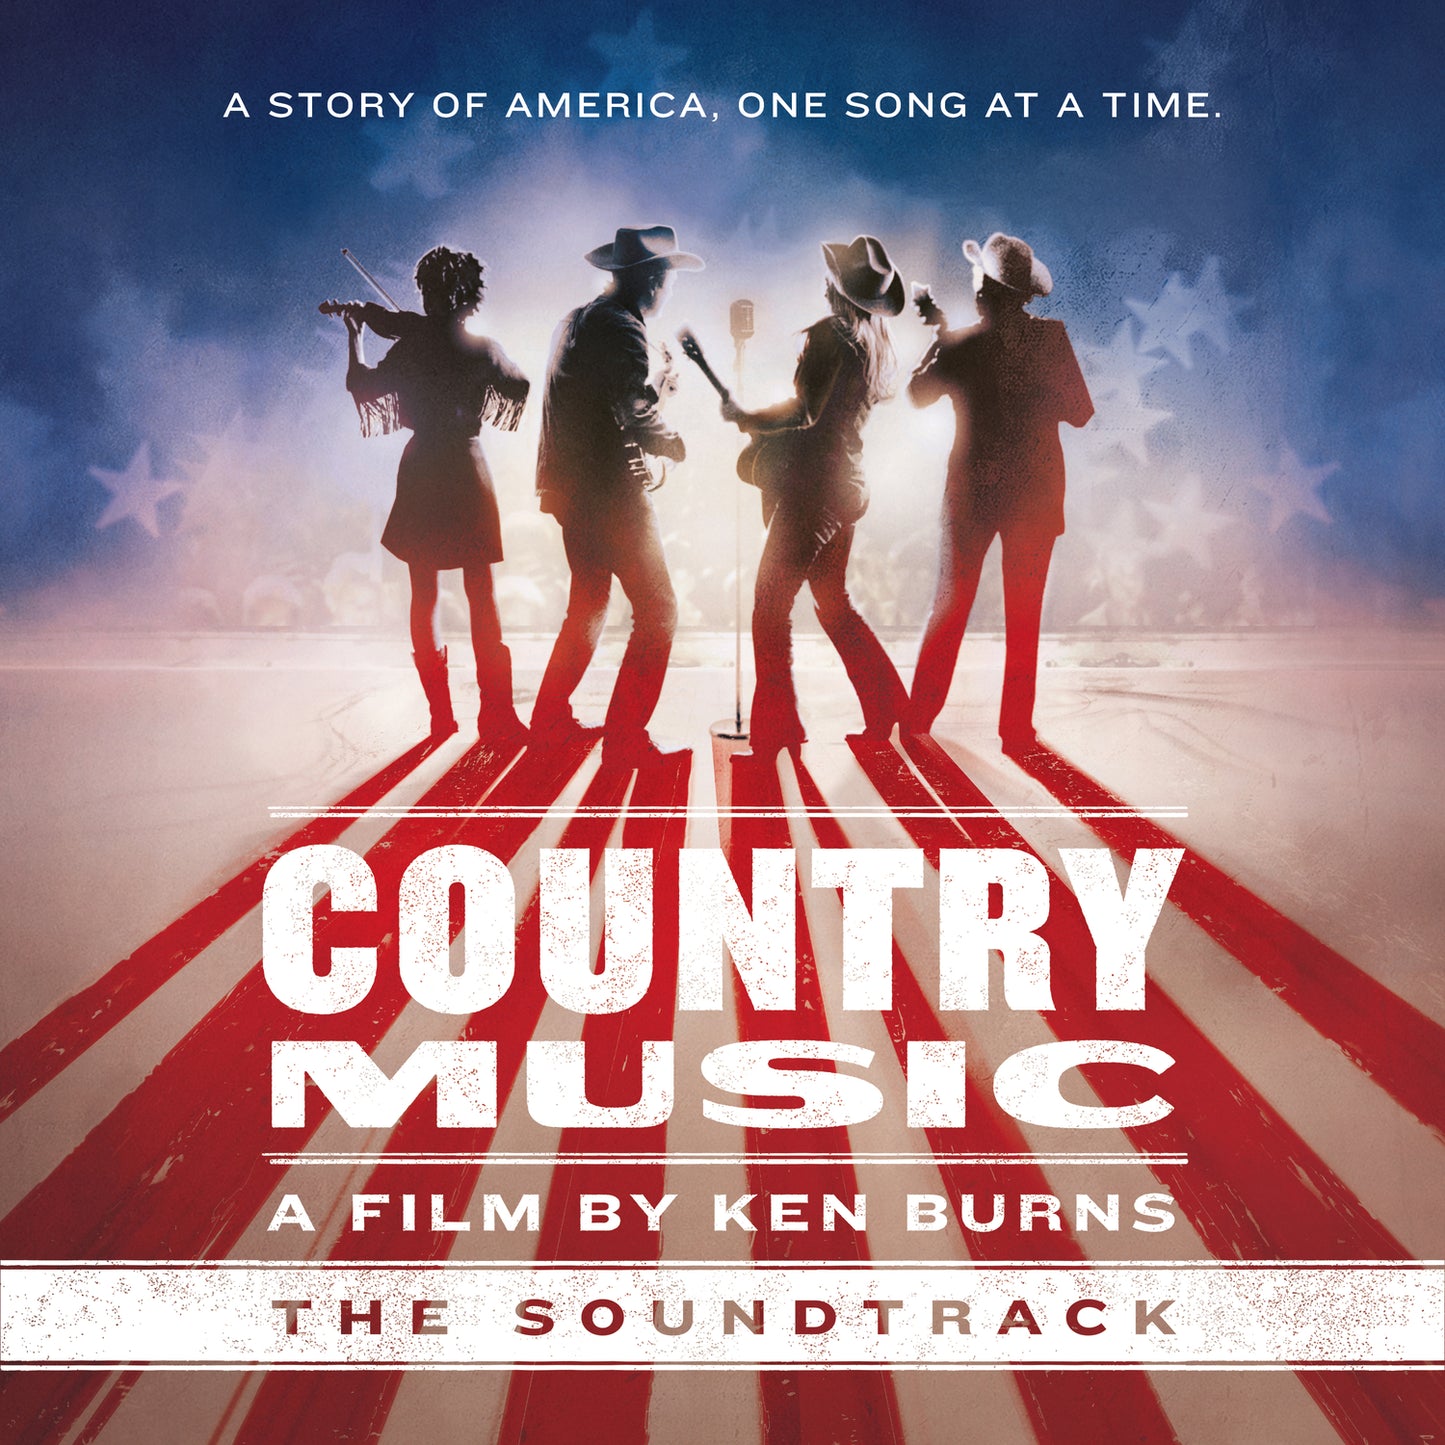 Country Music - A Film by Ken Burns  - The Soundtrack